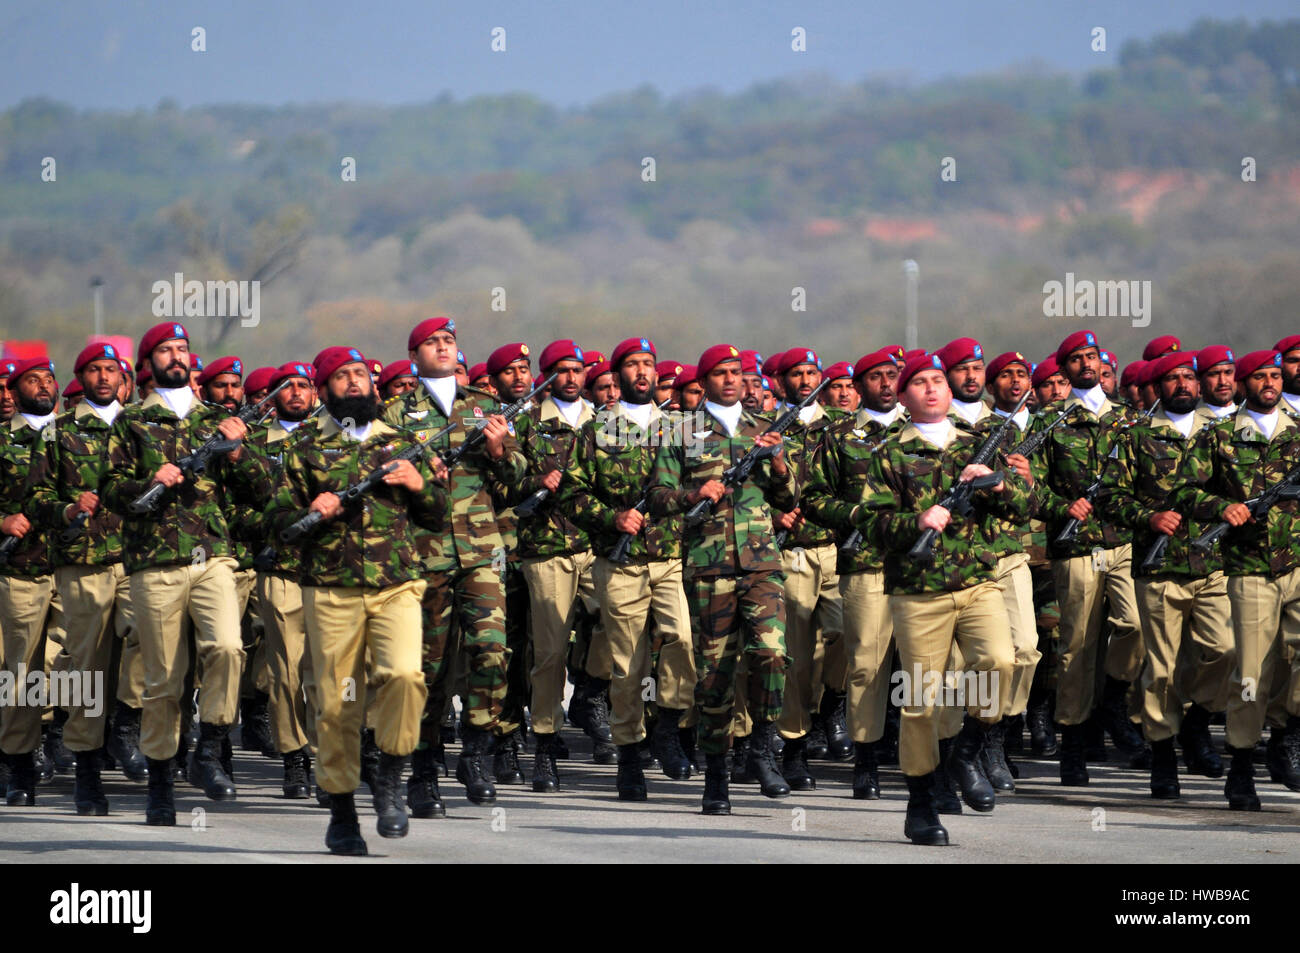 Islamabad. 19th Mar, 2017. Pakistani troops from the Special Services Group (SSG) march during a rehearsal for the military parade of Pakistan's National Day in Islamabad, capital of Pakistan on March 19, 2017. Pakistan will celebrate the National Day on March 23. Credit: Ahmad Kamal/Xinhua/Alamy Live News Stock Photo